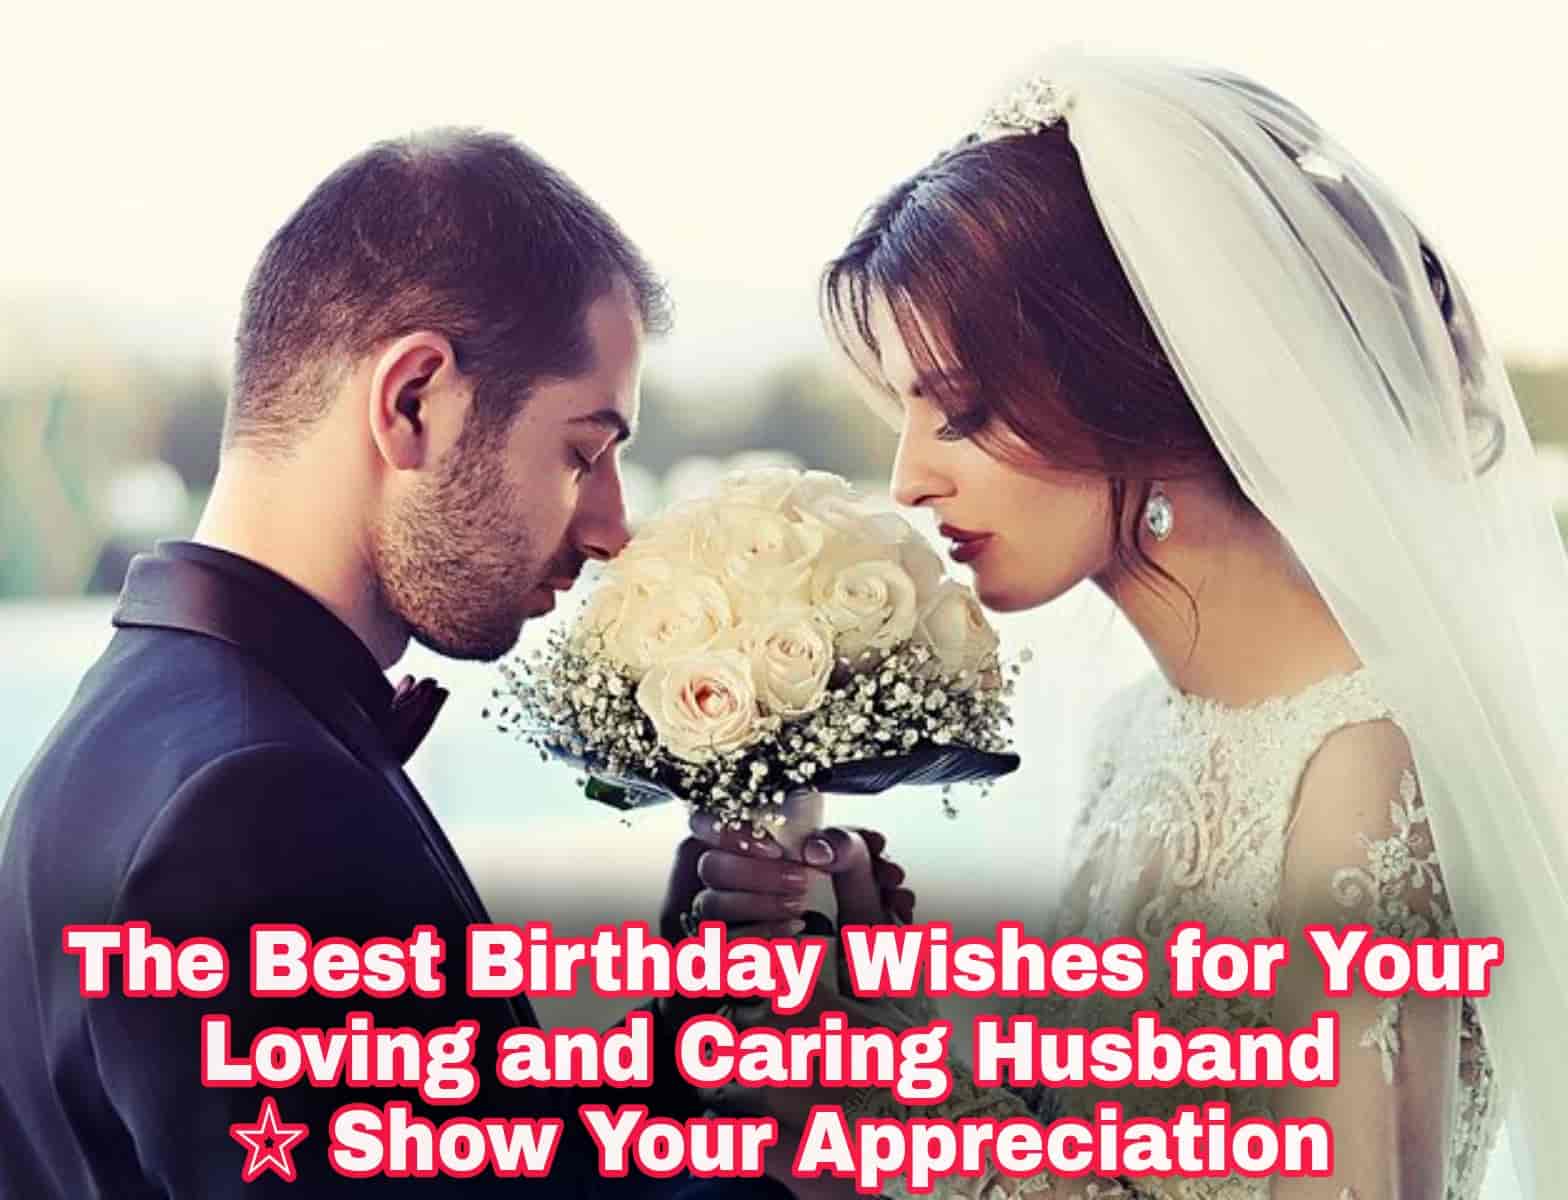 Birthday Wishes for Caring and Loving Husband